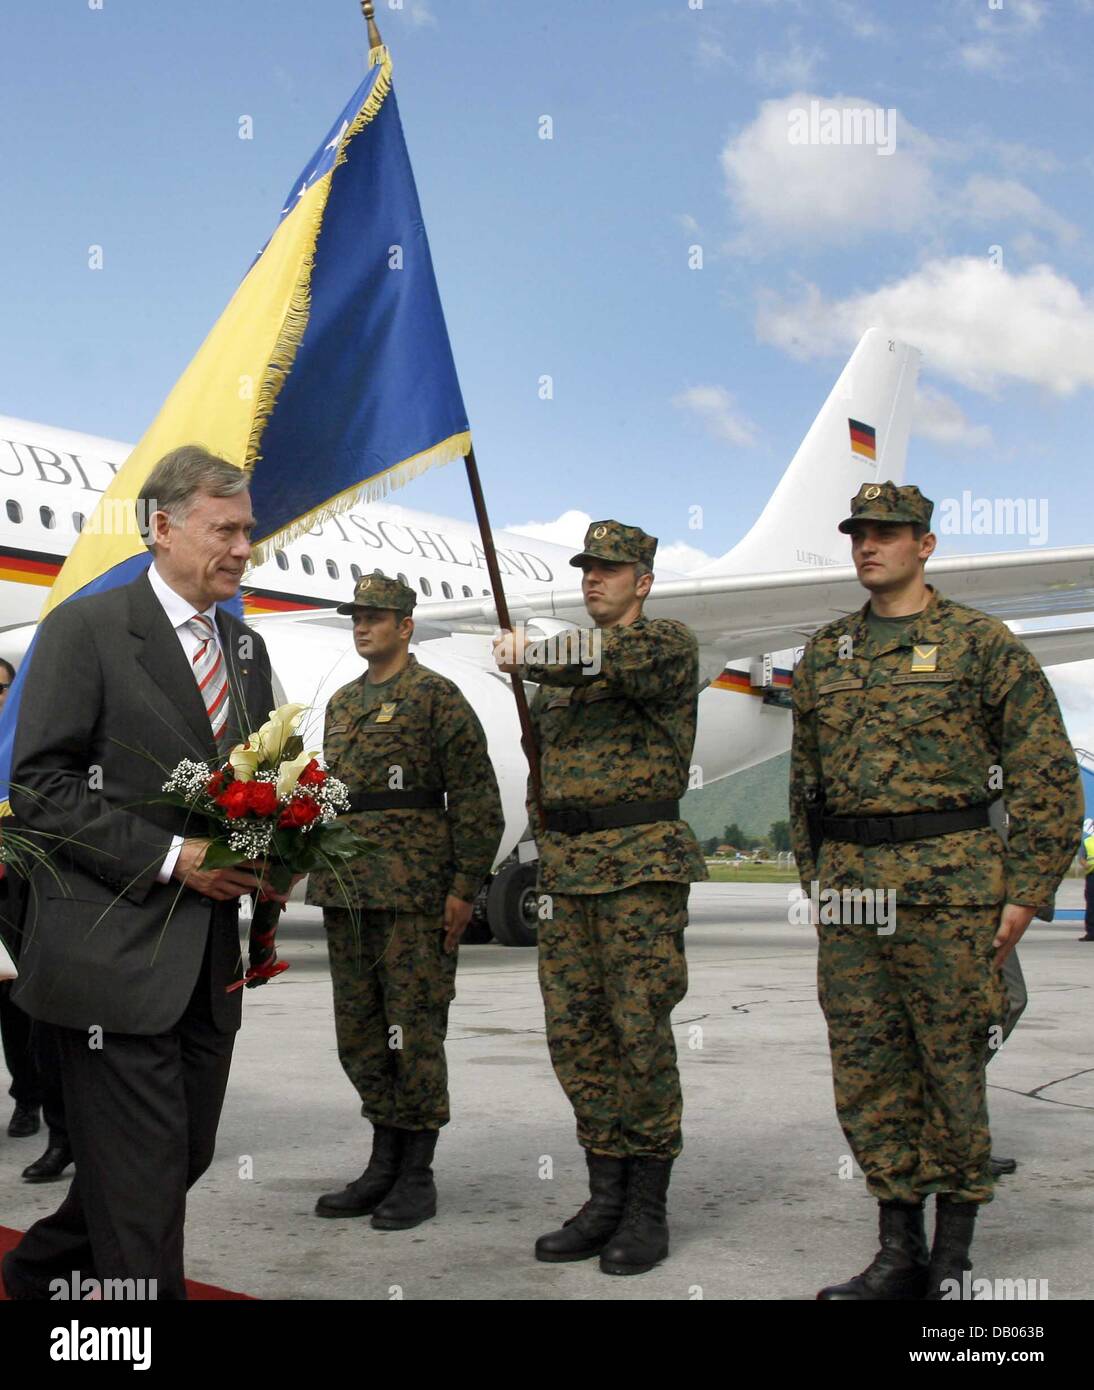 Soldiers stand guard to welcome German President Horst Koehler (L) to the airport of Sarajevo, Bosnia and Herzegovina, 05 July 2007. It is the last station of the Koehlers' four-day visit to Romania, Bulgaria and Bosnia and Herzegovina. Photo: Wolfgang Kumm Stock Photo